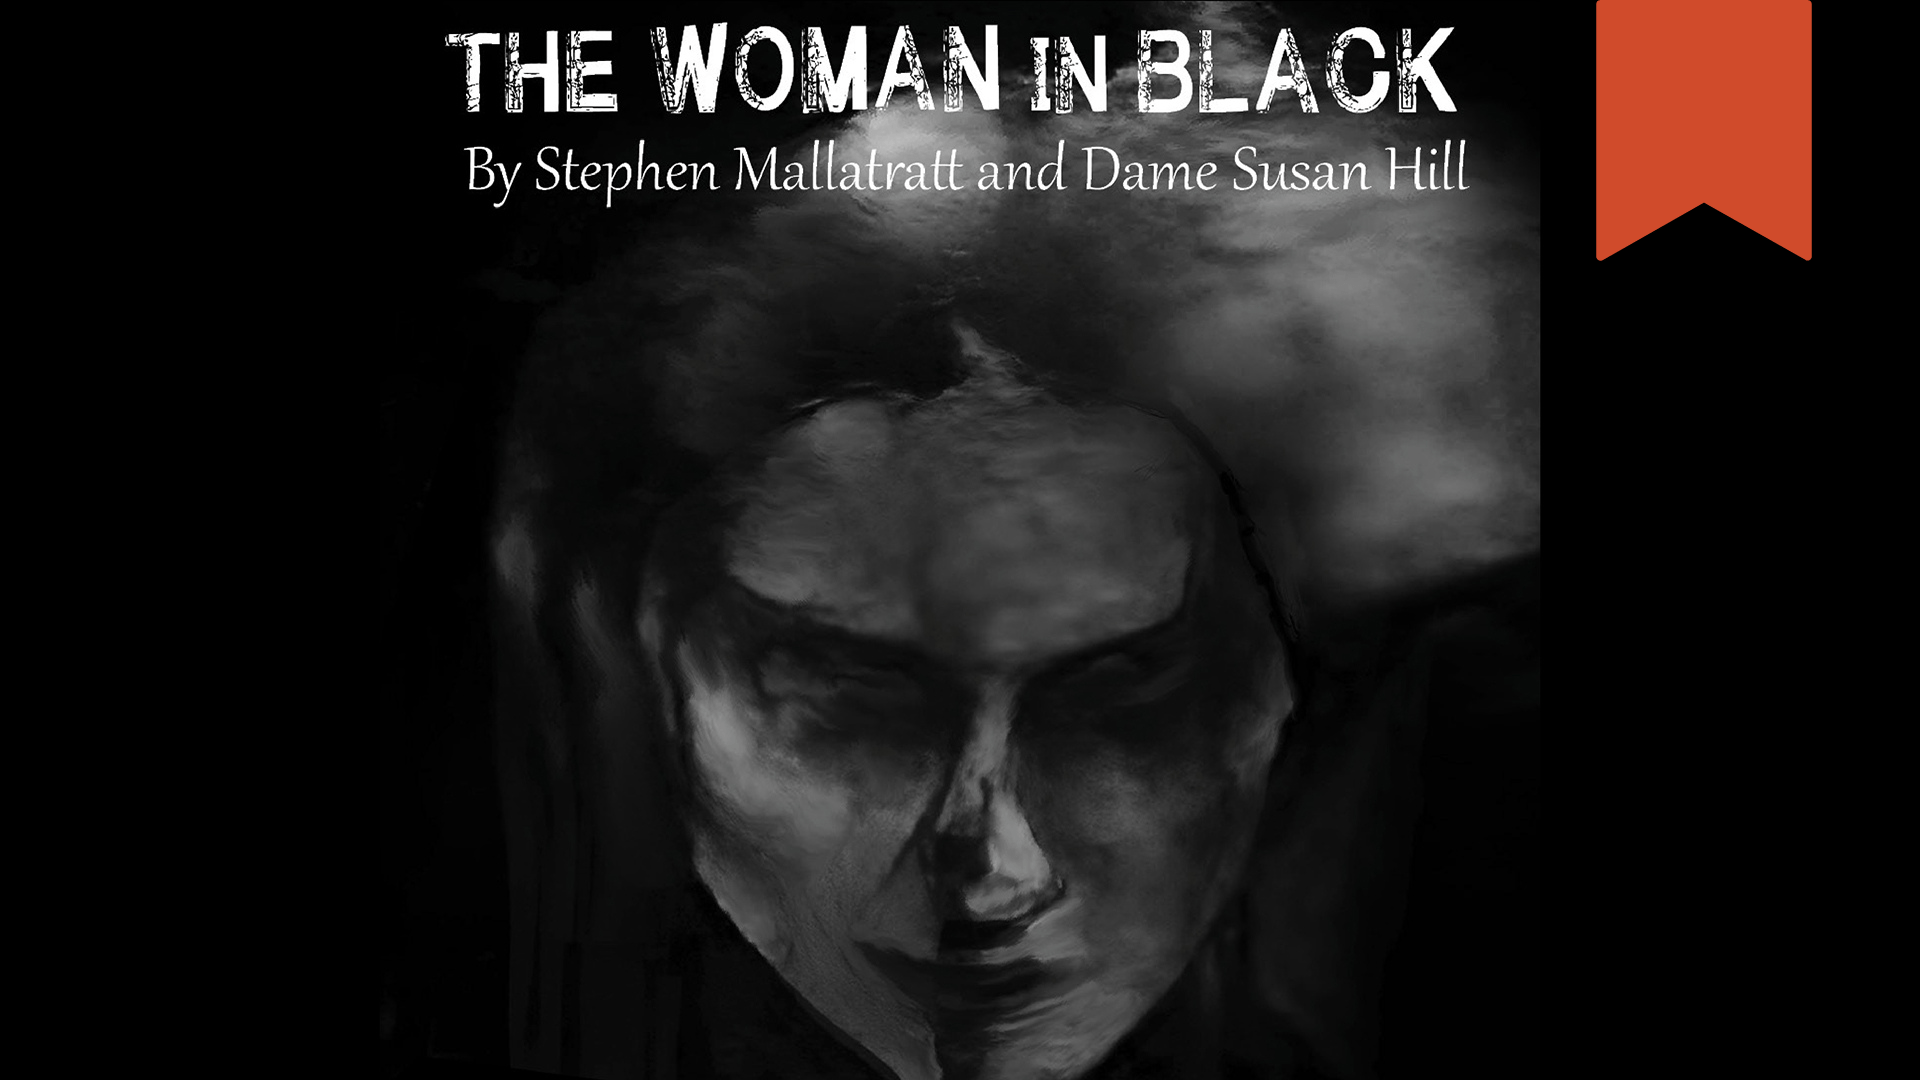 A banner with the title of the show, "The Woman in Black", followed by the text, "By Stephen Mallatratt and Dame Susan Hill", featuring the haunting image of the mysterious Woman in Black against a shadowy and black background.